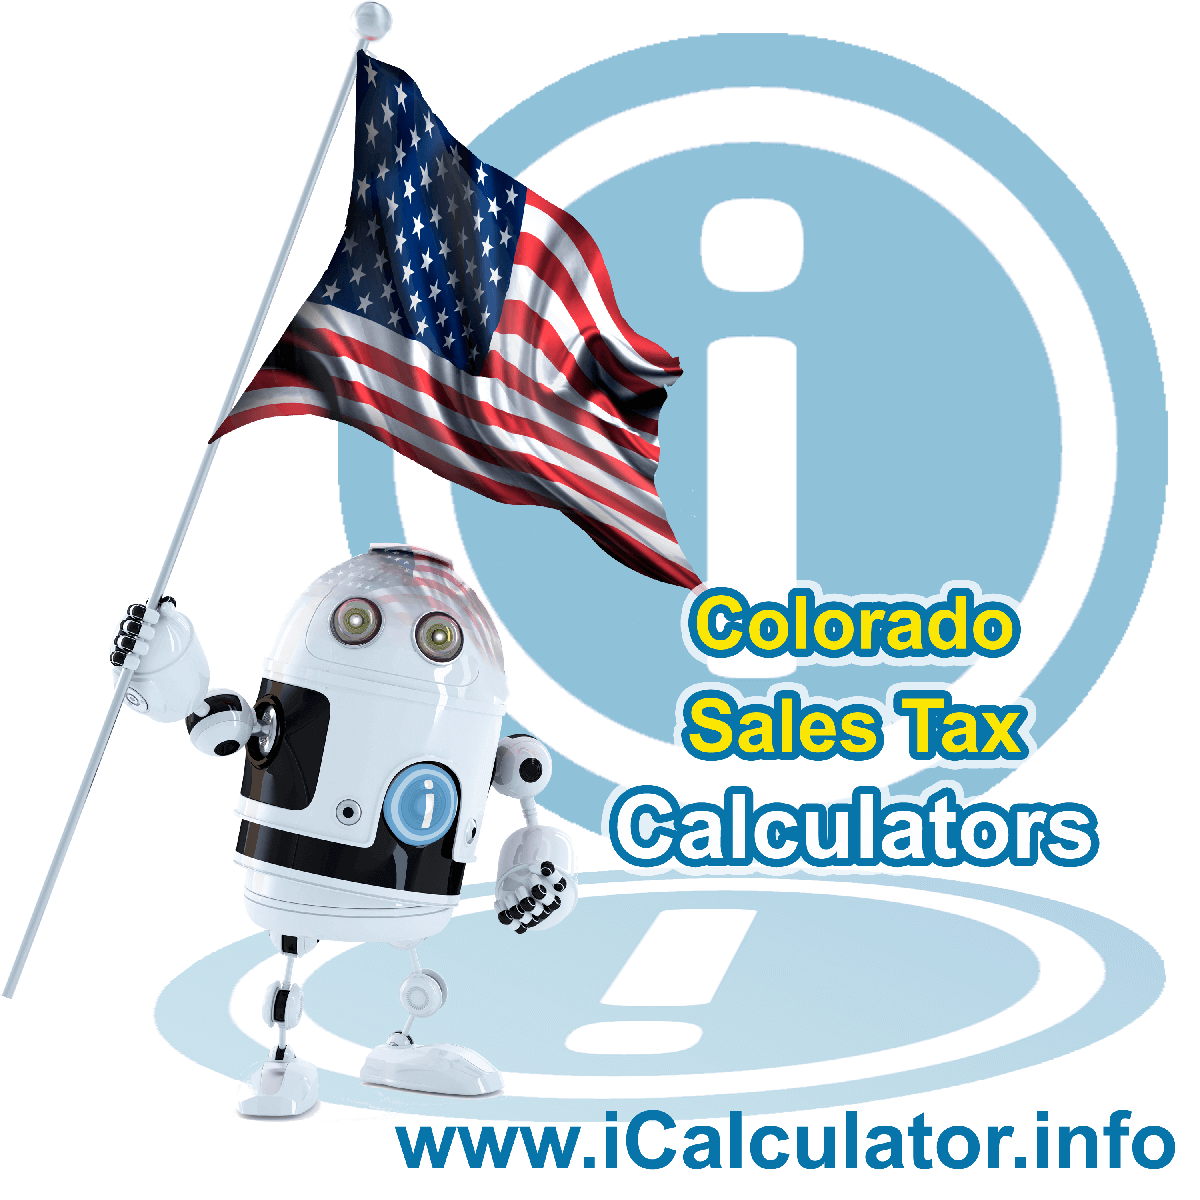 Colorado Sales Tax Comparison Calculator: This image illustrates a calculator robot comparing sales tax in Colorado manually using the Colorado Sales Tax Formula. You can use this information to compare Sales Tax manually or use the Colorado Sales Tax Comparison Calculator to calculate and compare Colorado sales tax online.